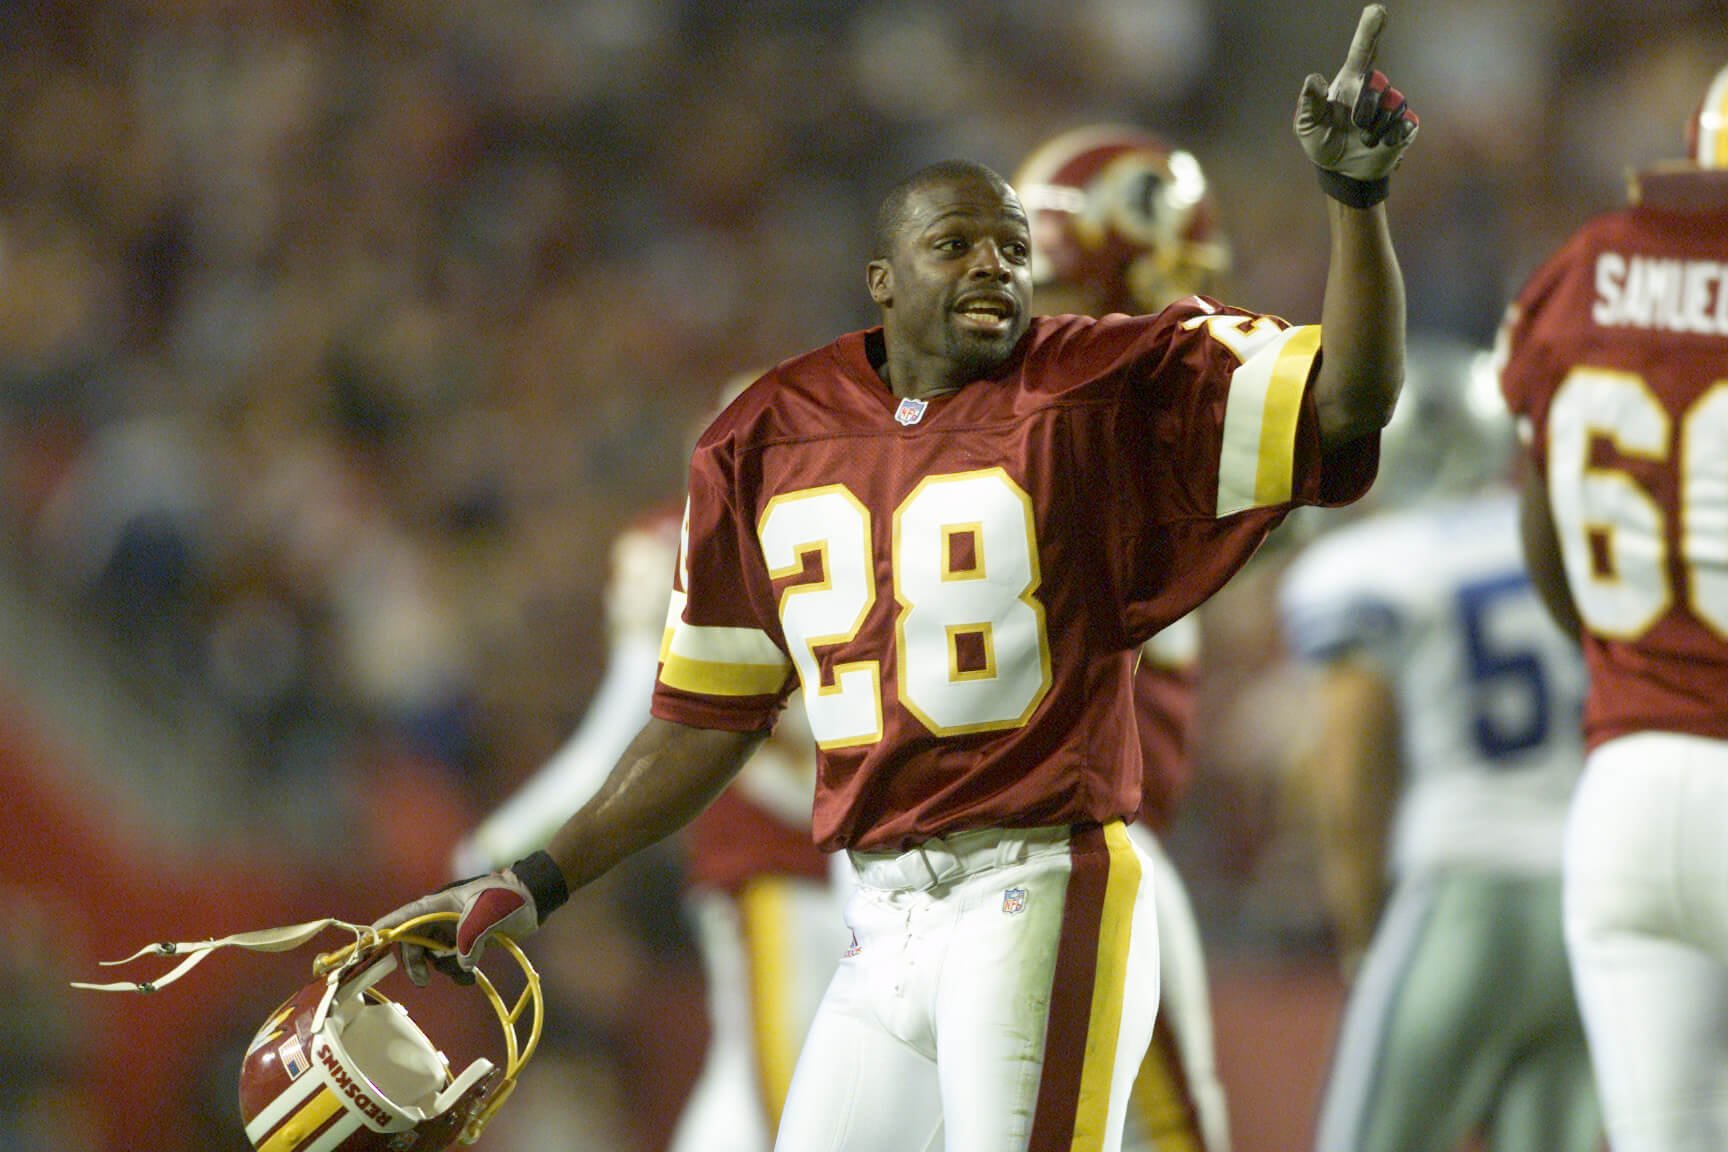 Hall of Fame CB Darrell Green to have No. 28 jersey retired by Washington Commanders